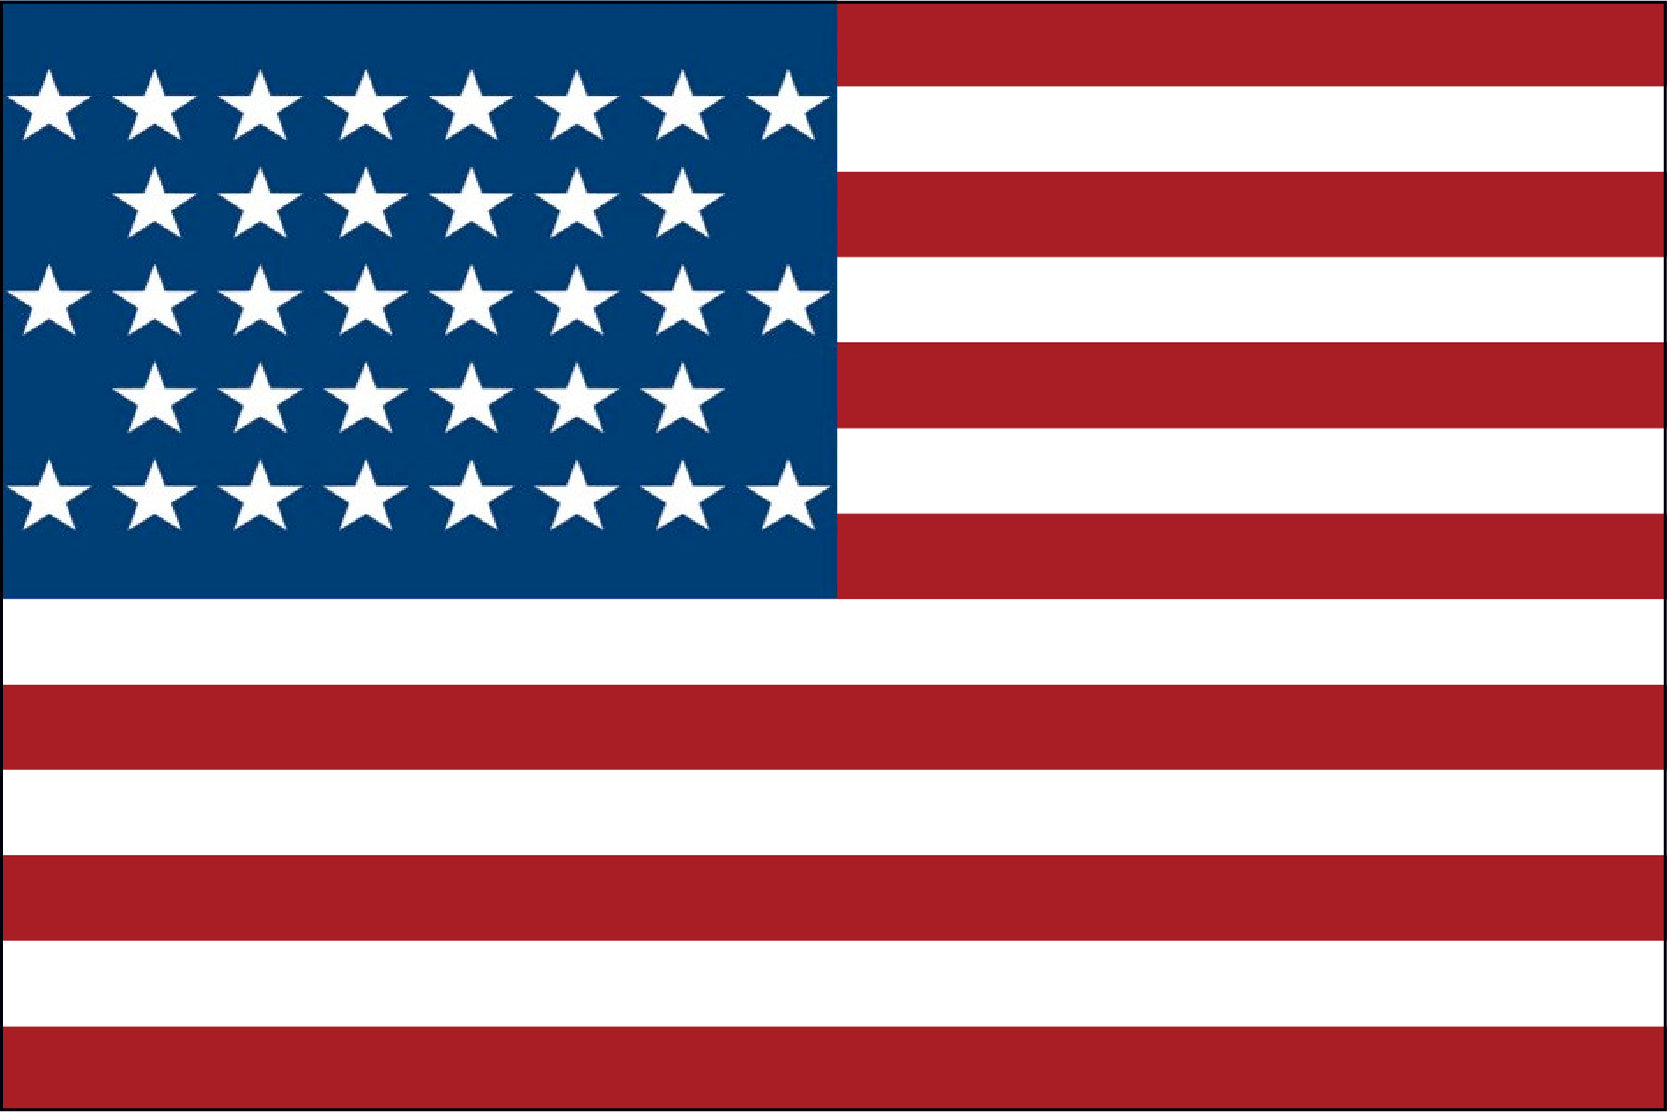 36 Star Old Glory Flag - LEAD TIMES ARE CURRENTLY RUNNING 6-8 WEEKS